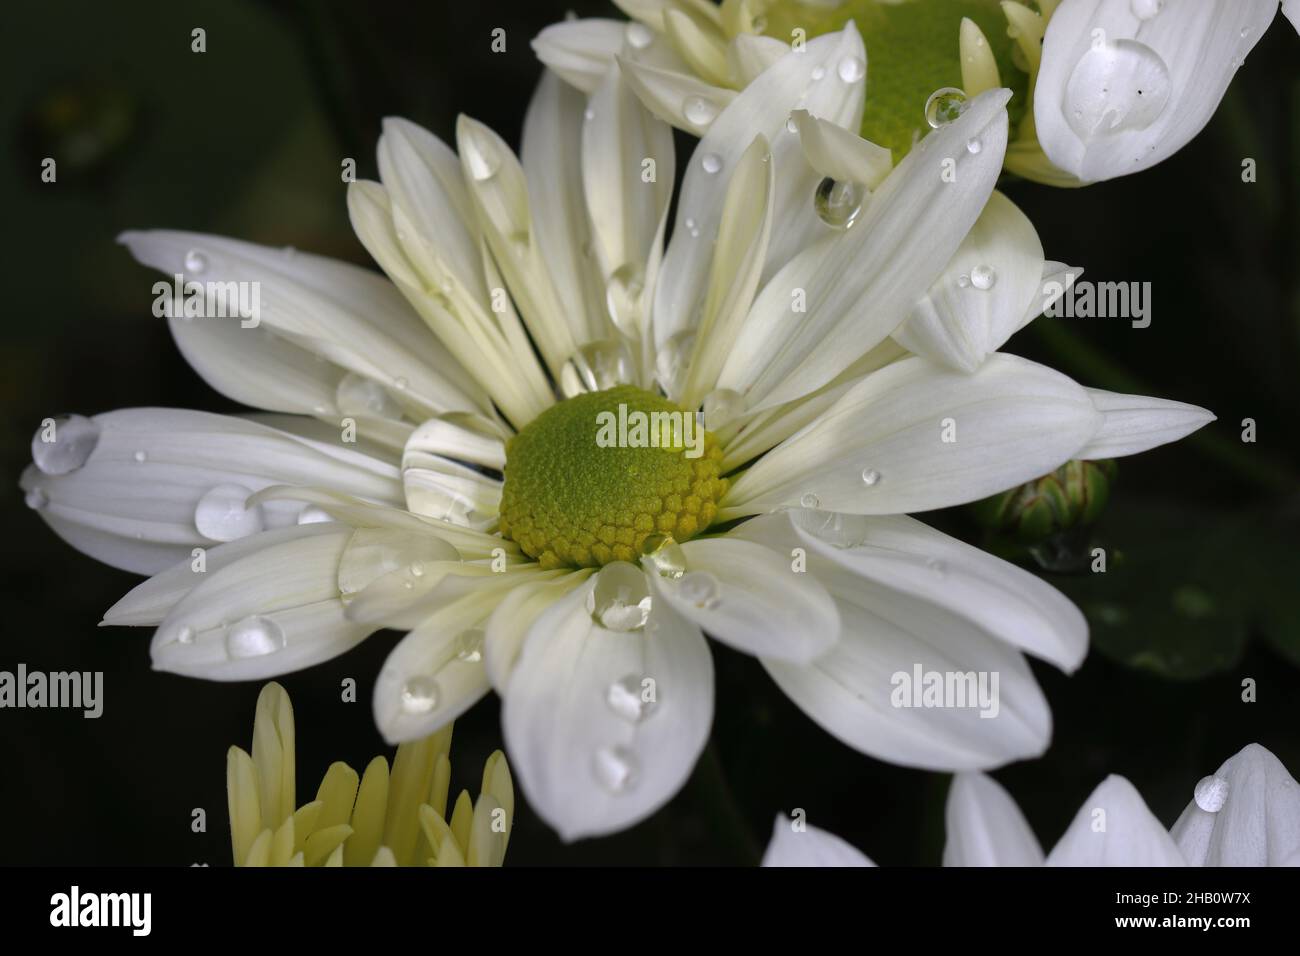 close-up of a beautiful white chrysanthemum flower with raindrops on the petals Stock Photo